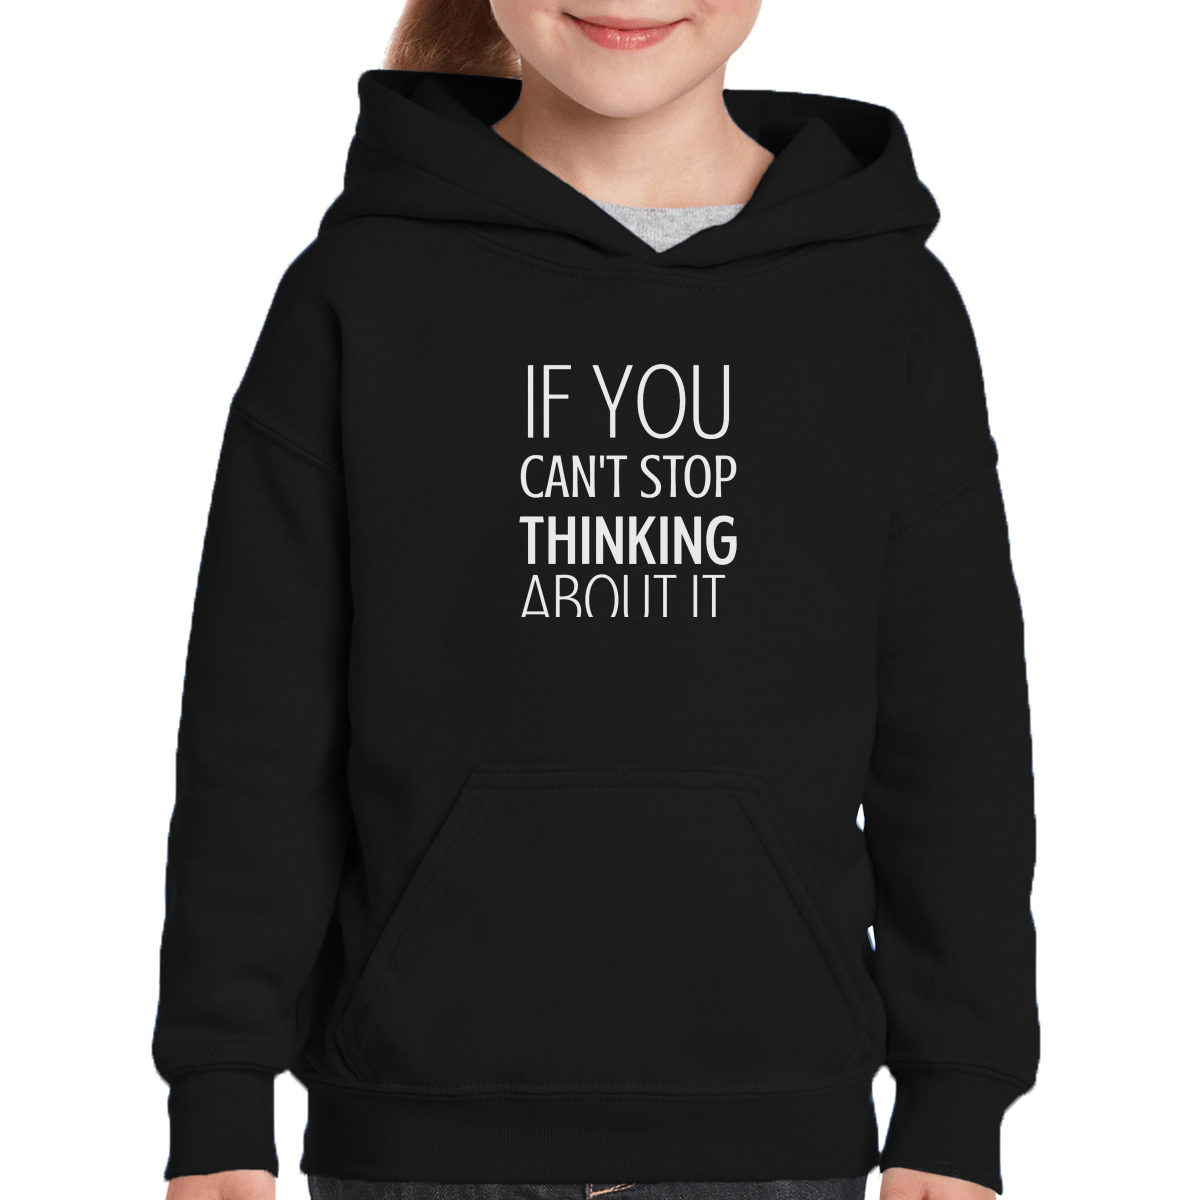 Can't Stop Thinking About It? Kids Hoodie | Black